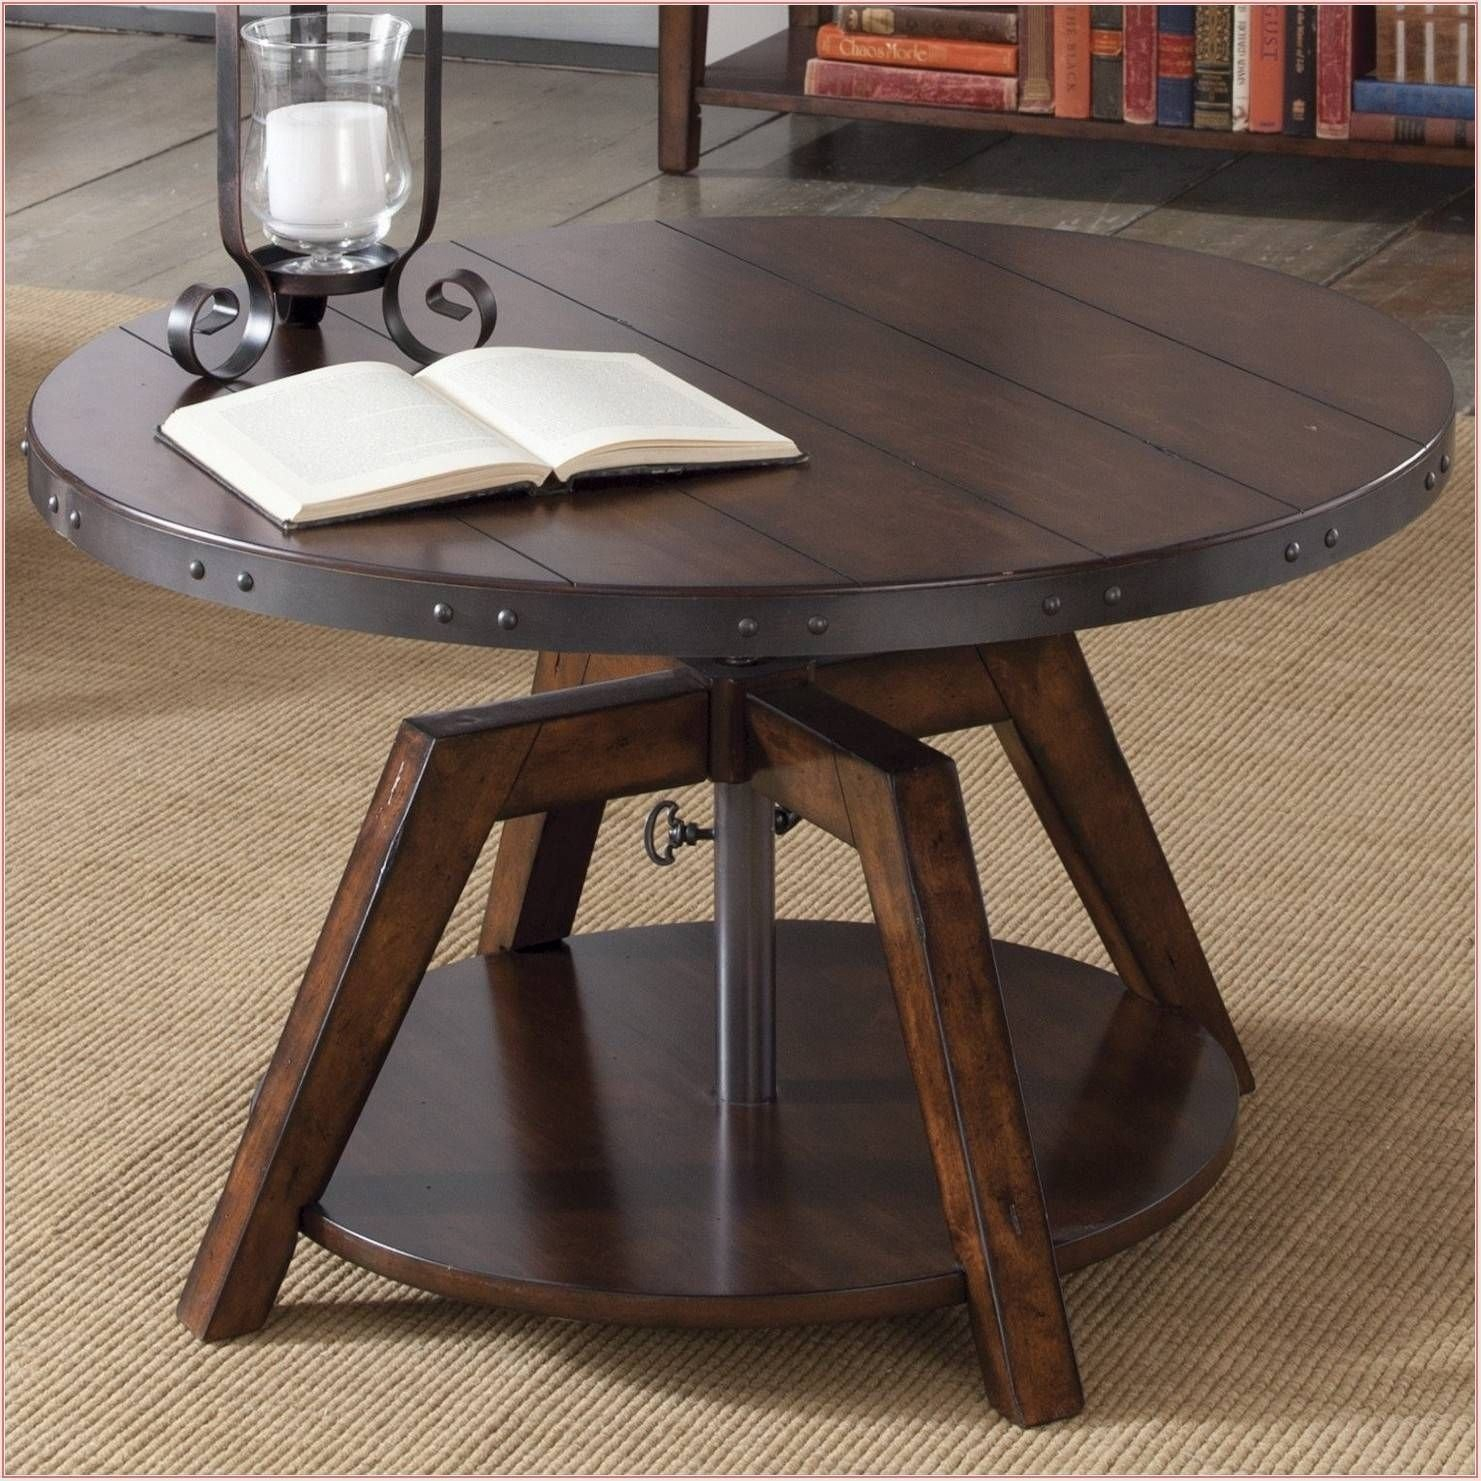 50 Amazing Convertible Coffee Table To Dining Table Up To 70 Off within dimensions 1481 X 1481